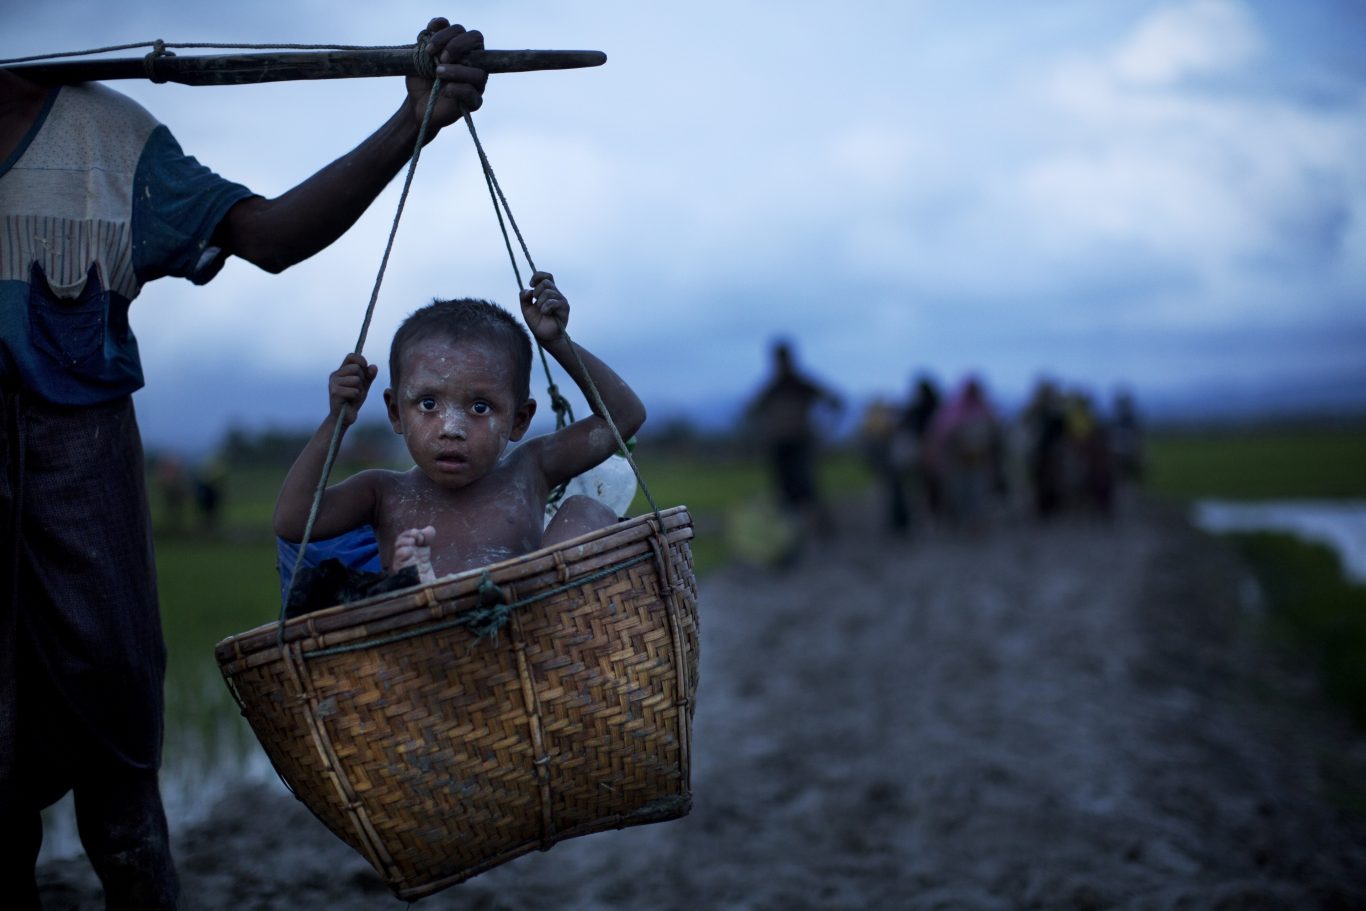 A child is carried in a basket as Rohingya ethnic minority members walk through rice fields after crossing over to the Bangladesh side of the border near Cox's Bazar's Teknaf area (Bernat Armangue/AP)